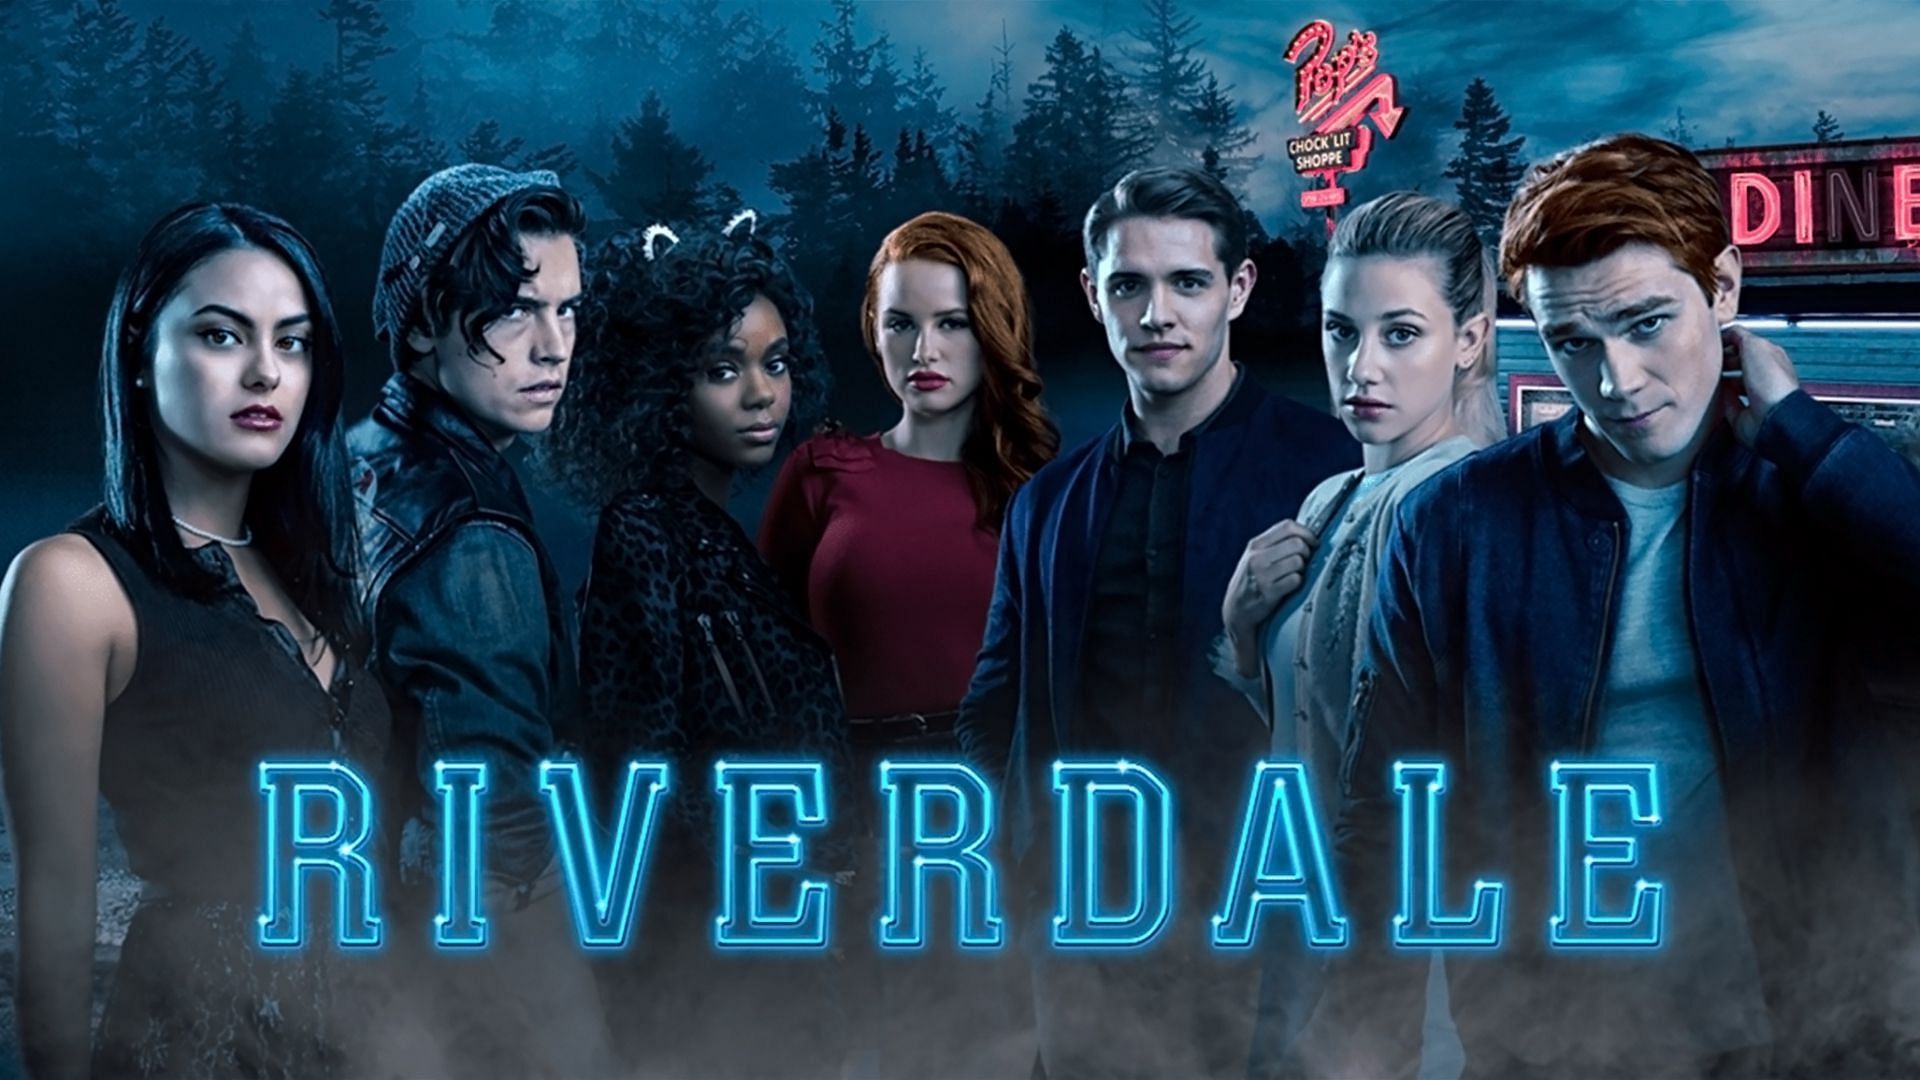 The official poster for Riverdale (Image via CW)